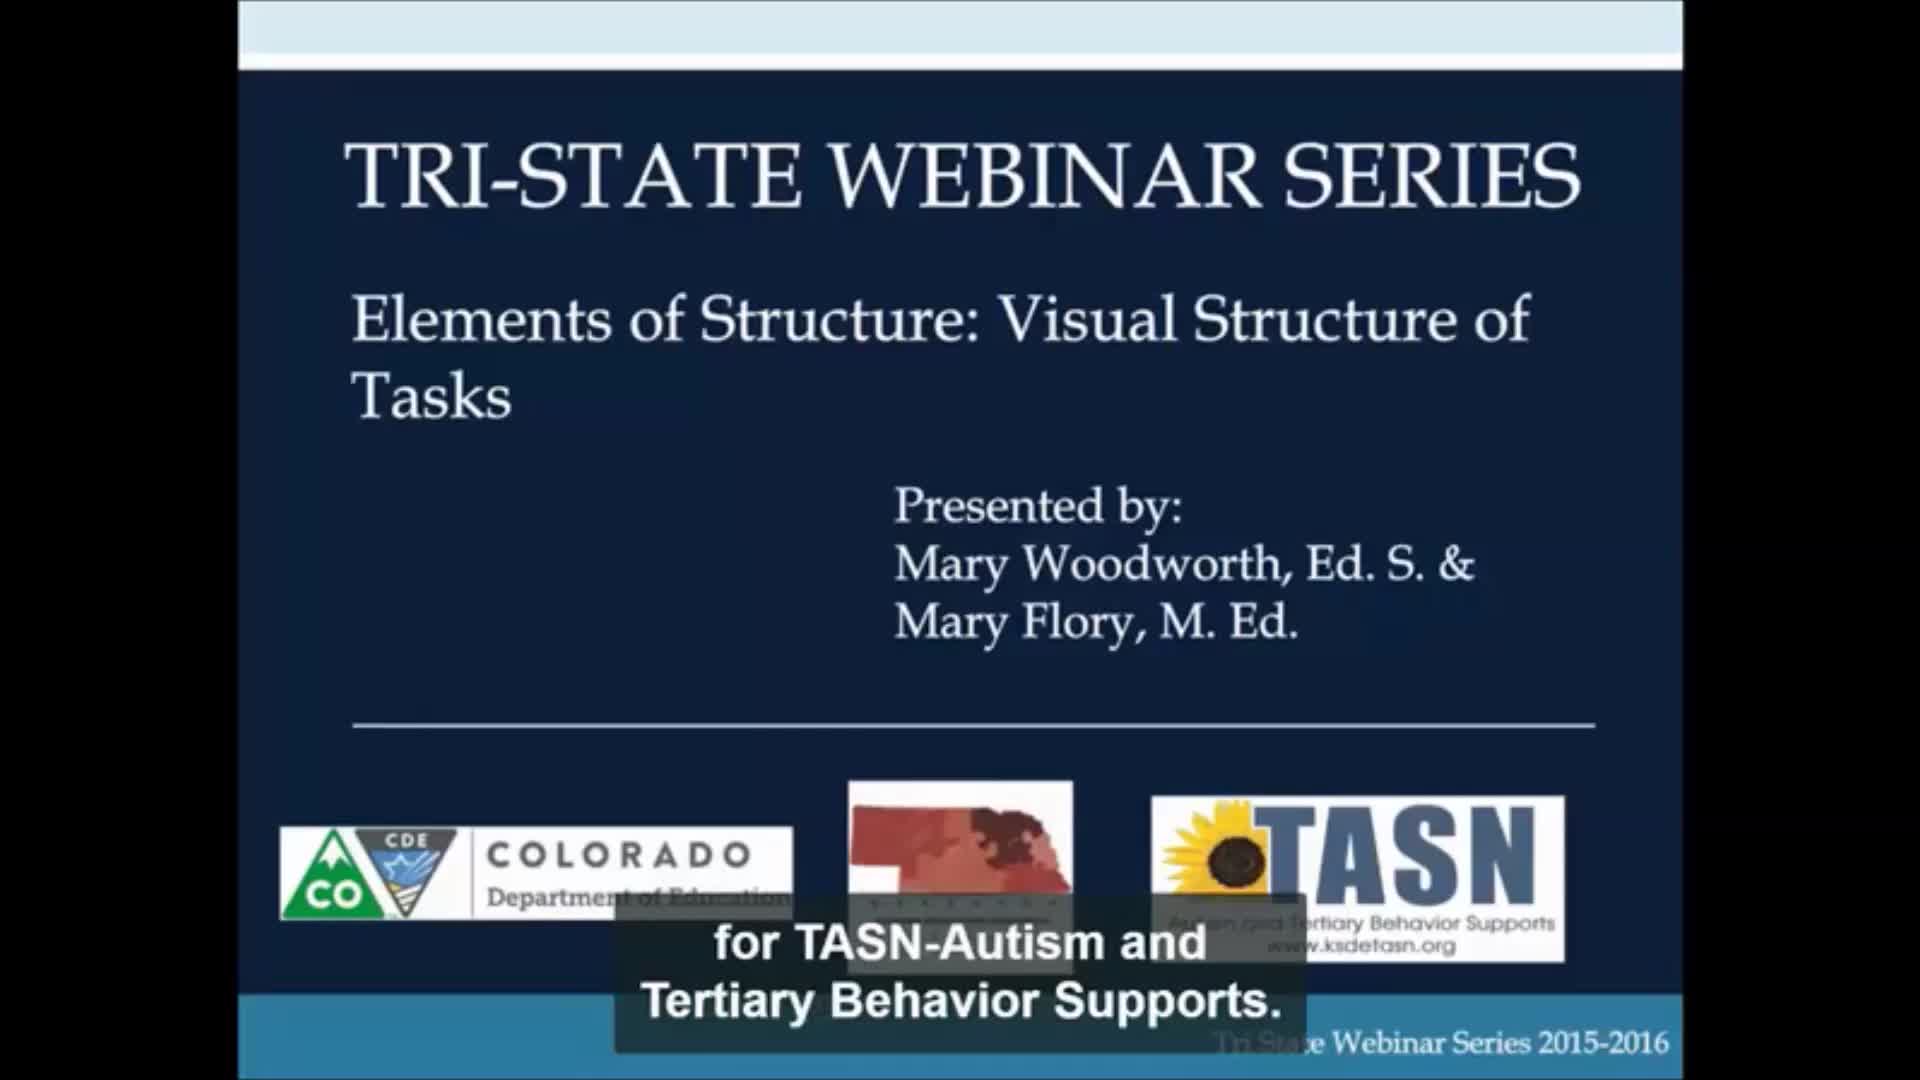 Elements of Structure: Visual Structure of Tasks